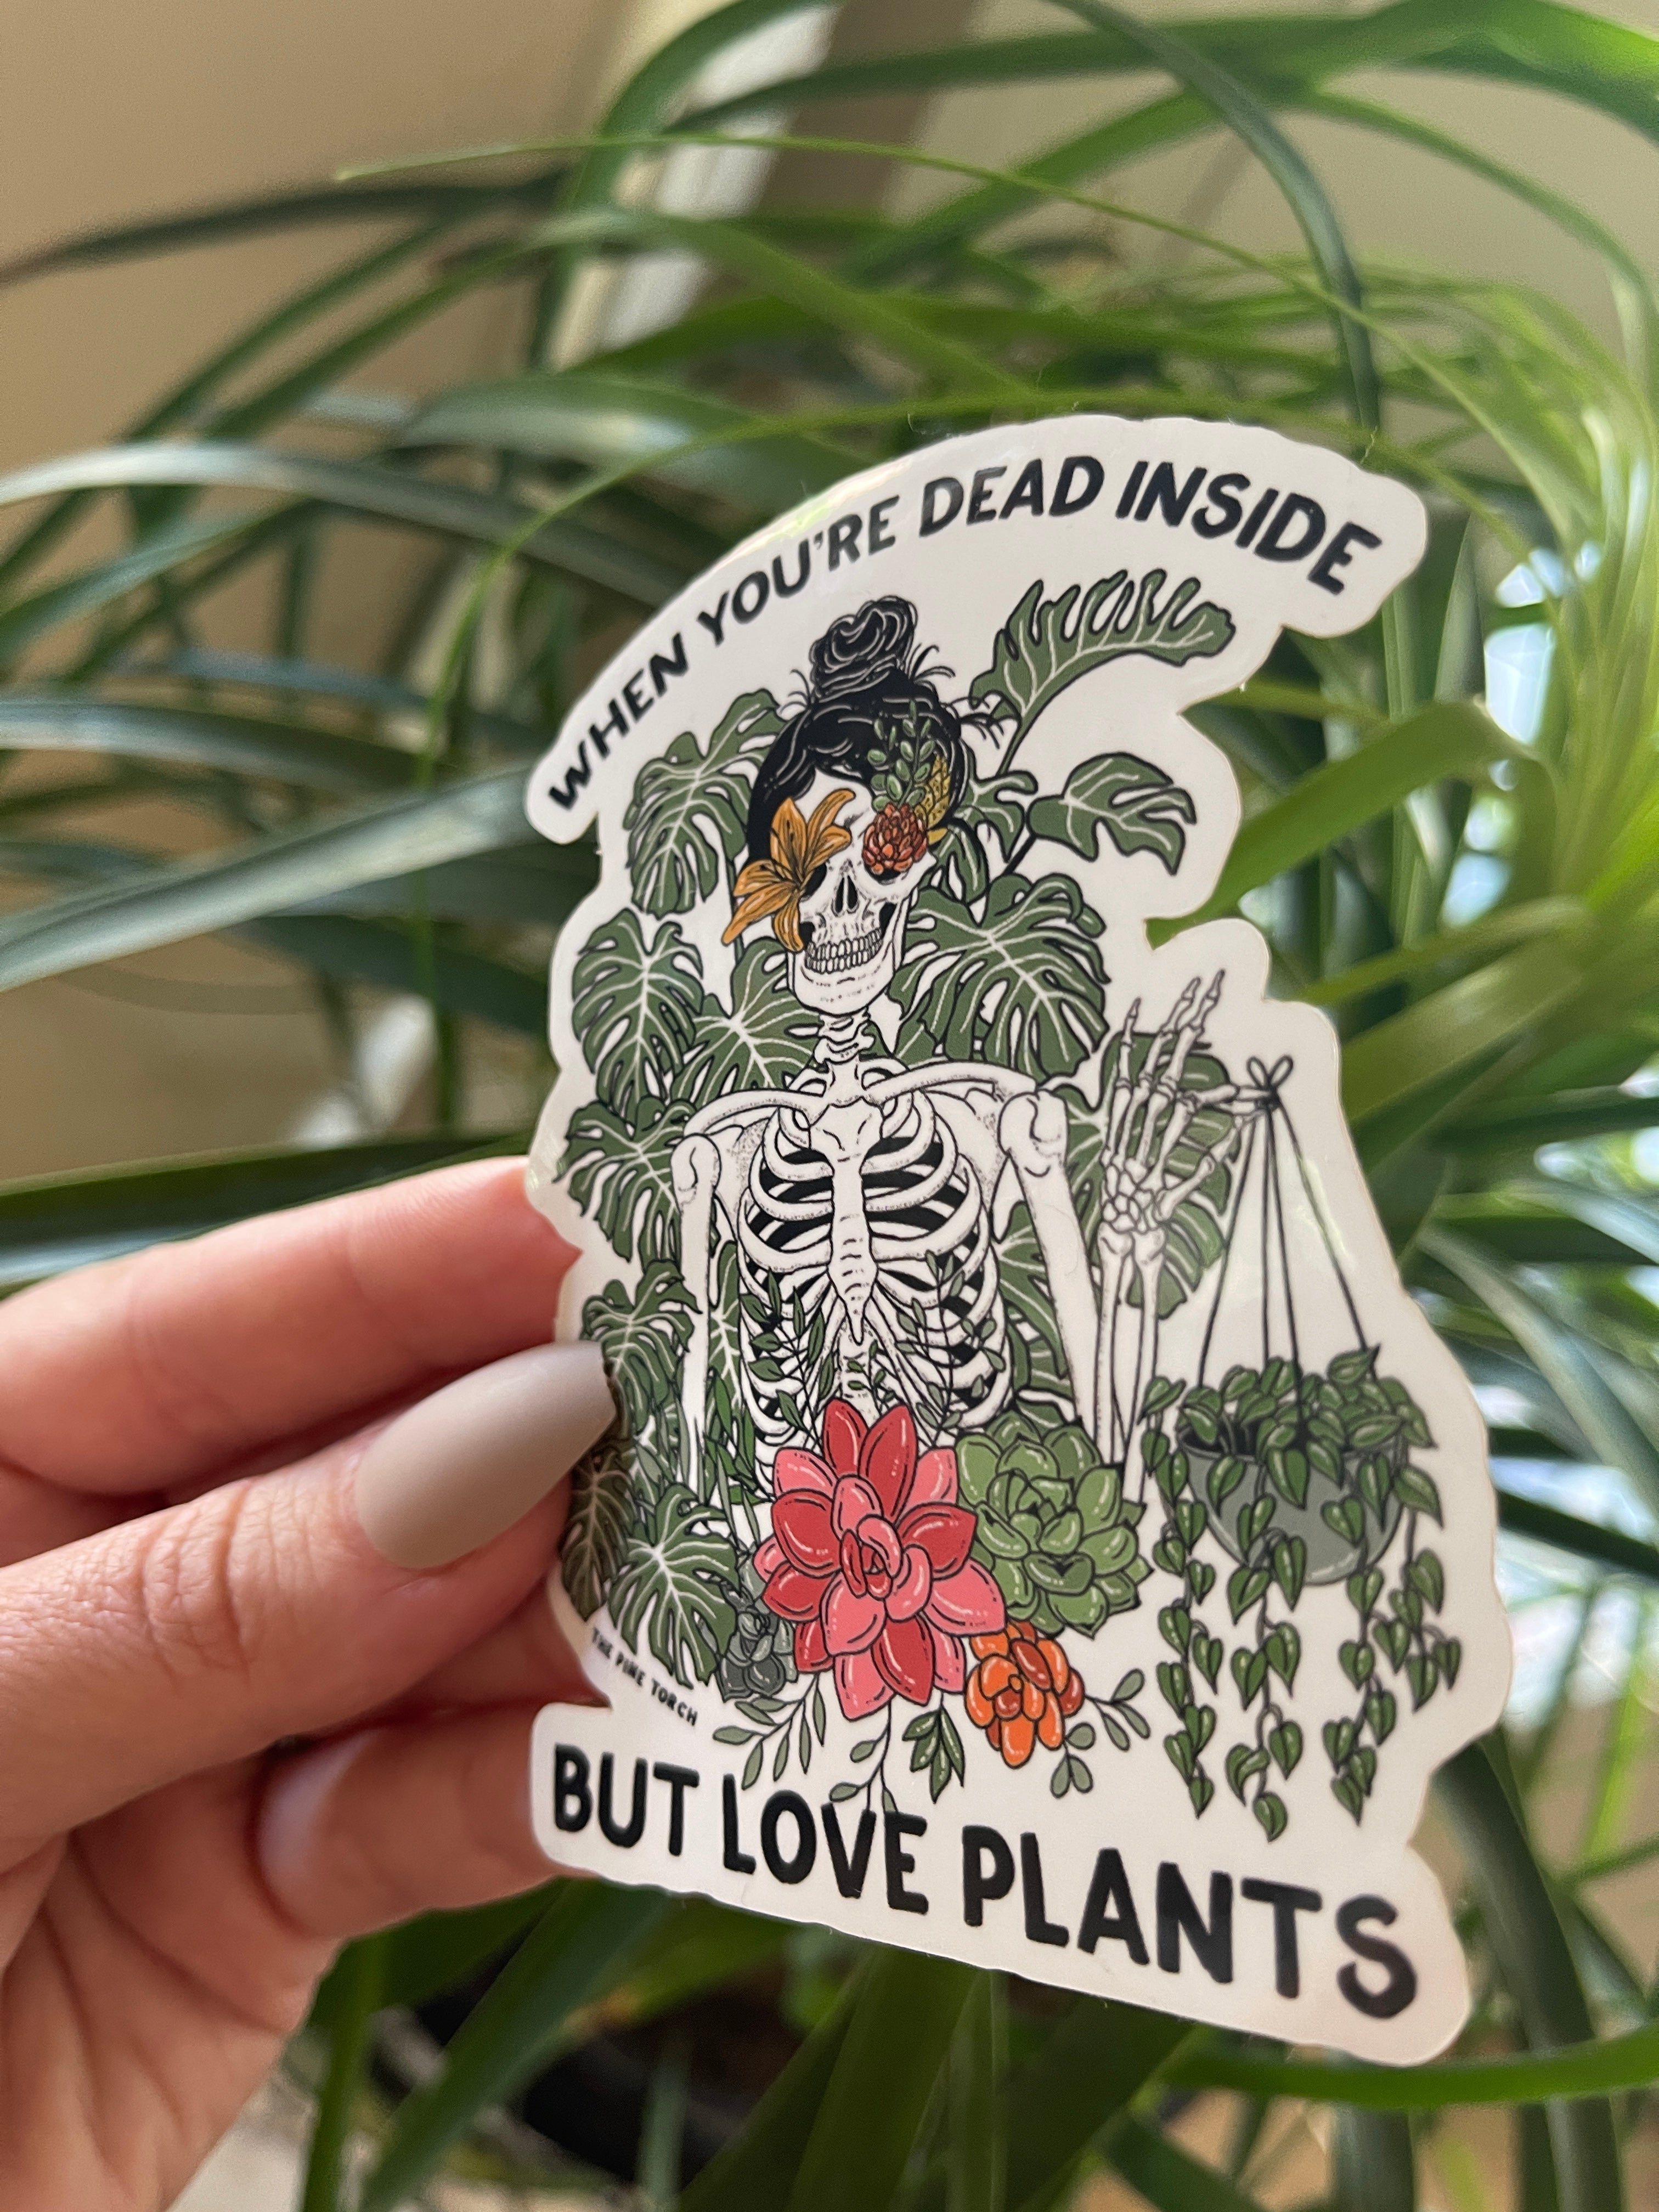 WHEN YOU'RE DEAD INSIDE BUT LOVE PLANTS « HOLOGRAPHIC STICKER »